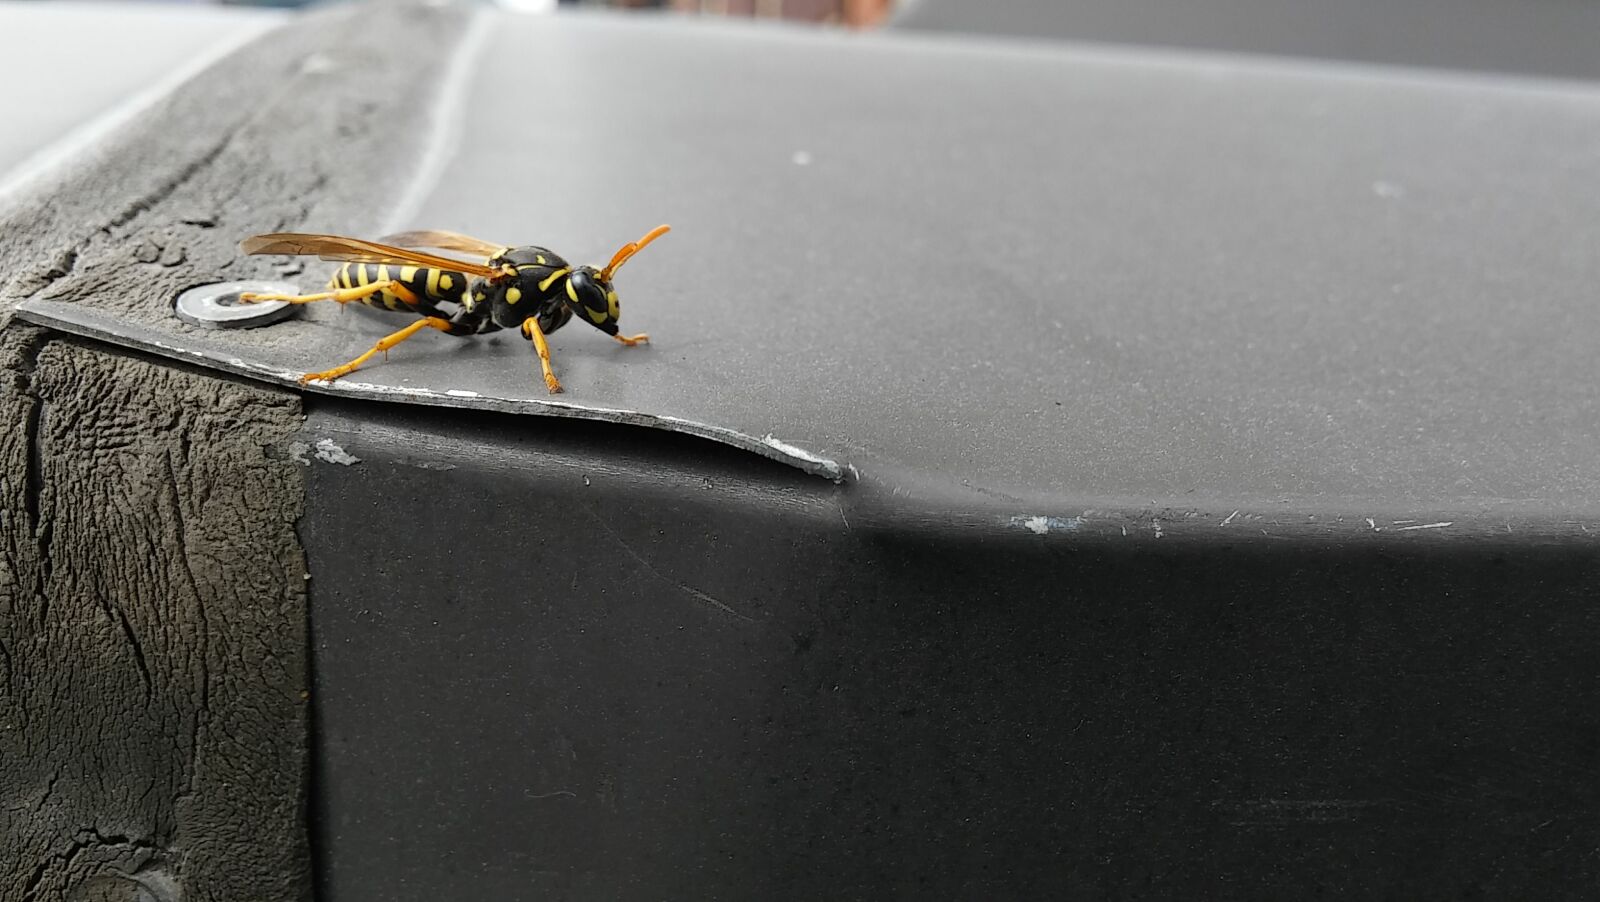 LG G STYLO sample photo. Wasp, nature, smartphone, insect photography